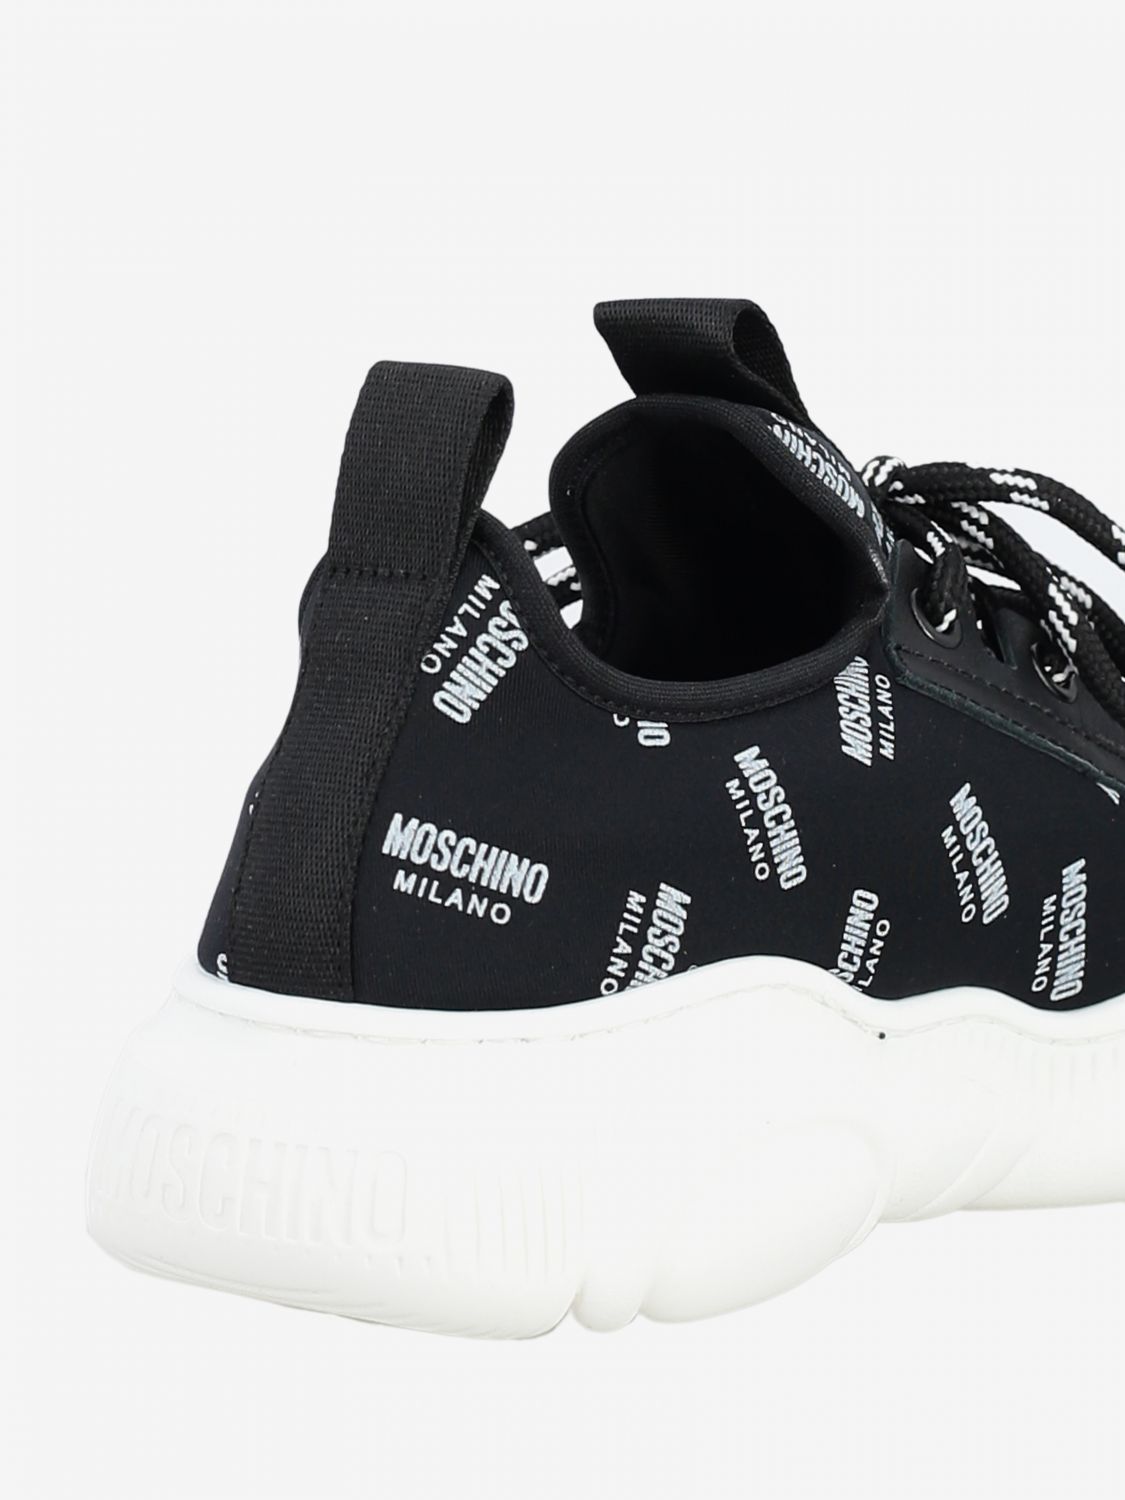 moschino shoes for toddlers